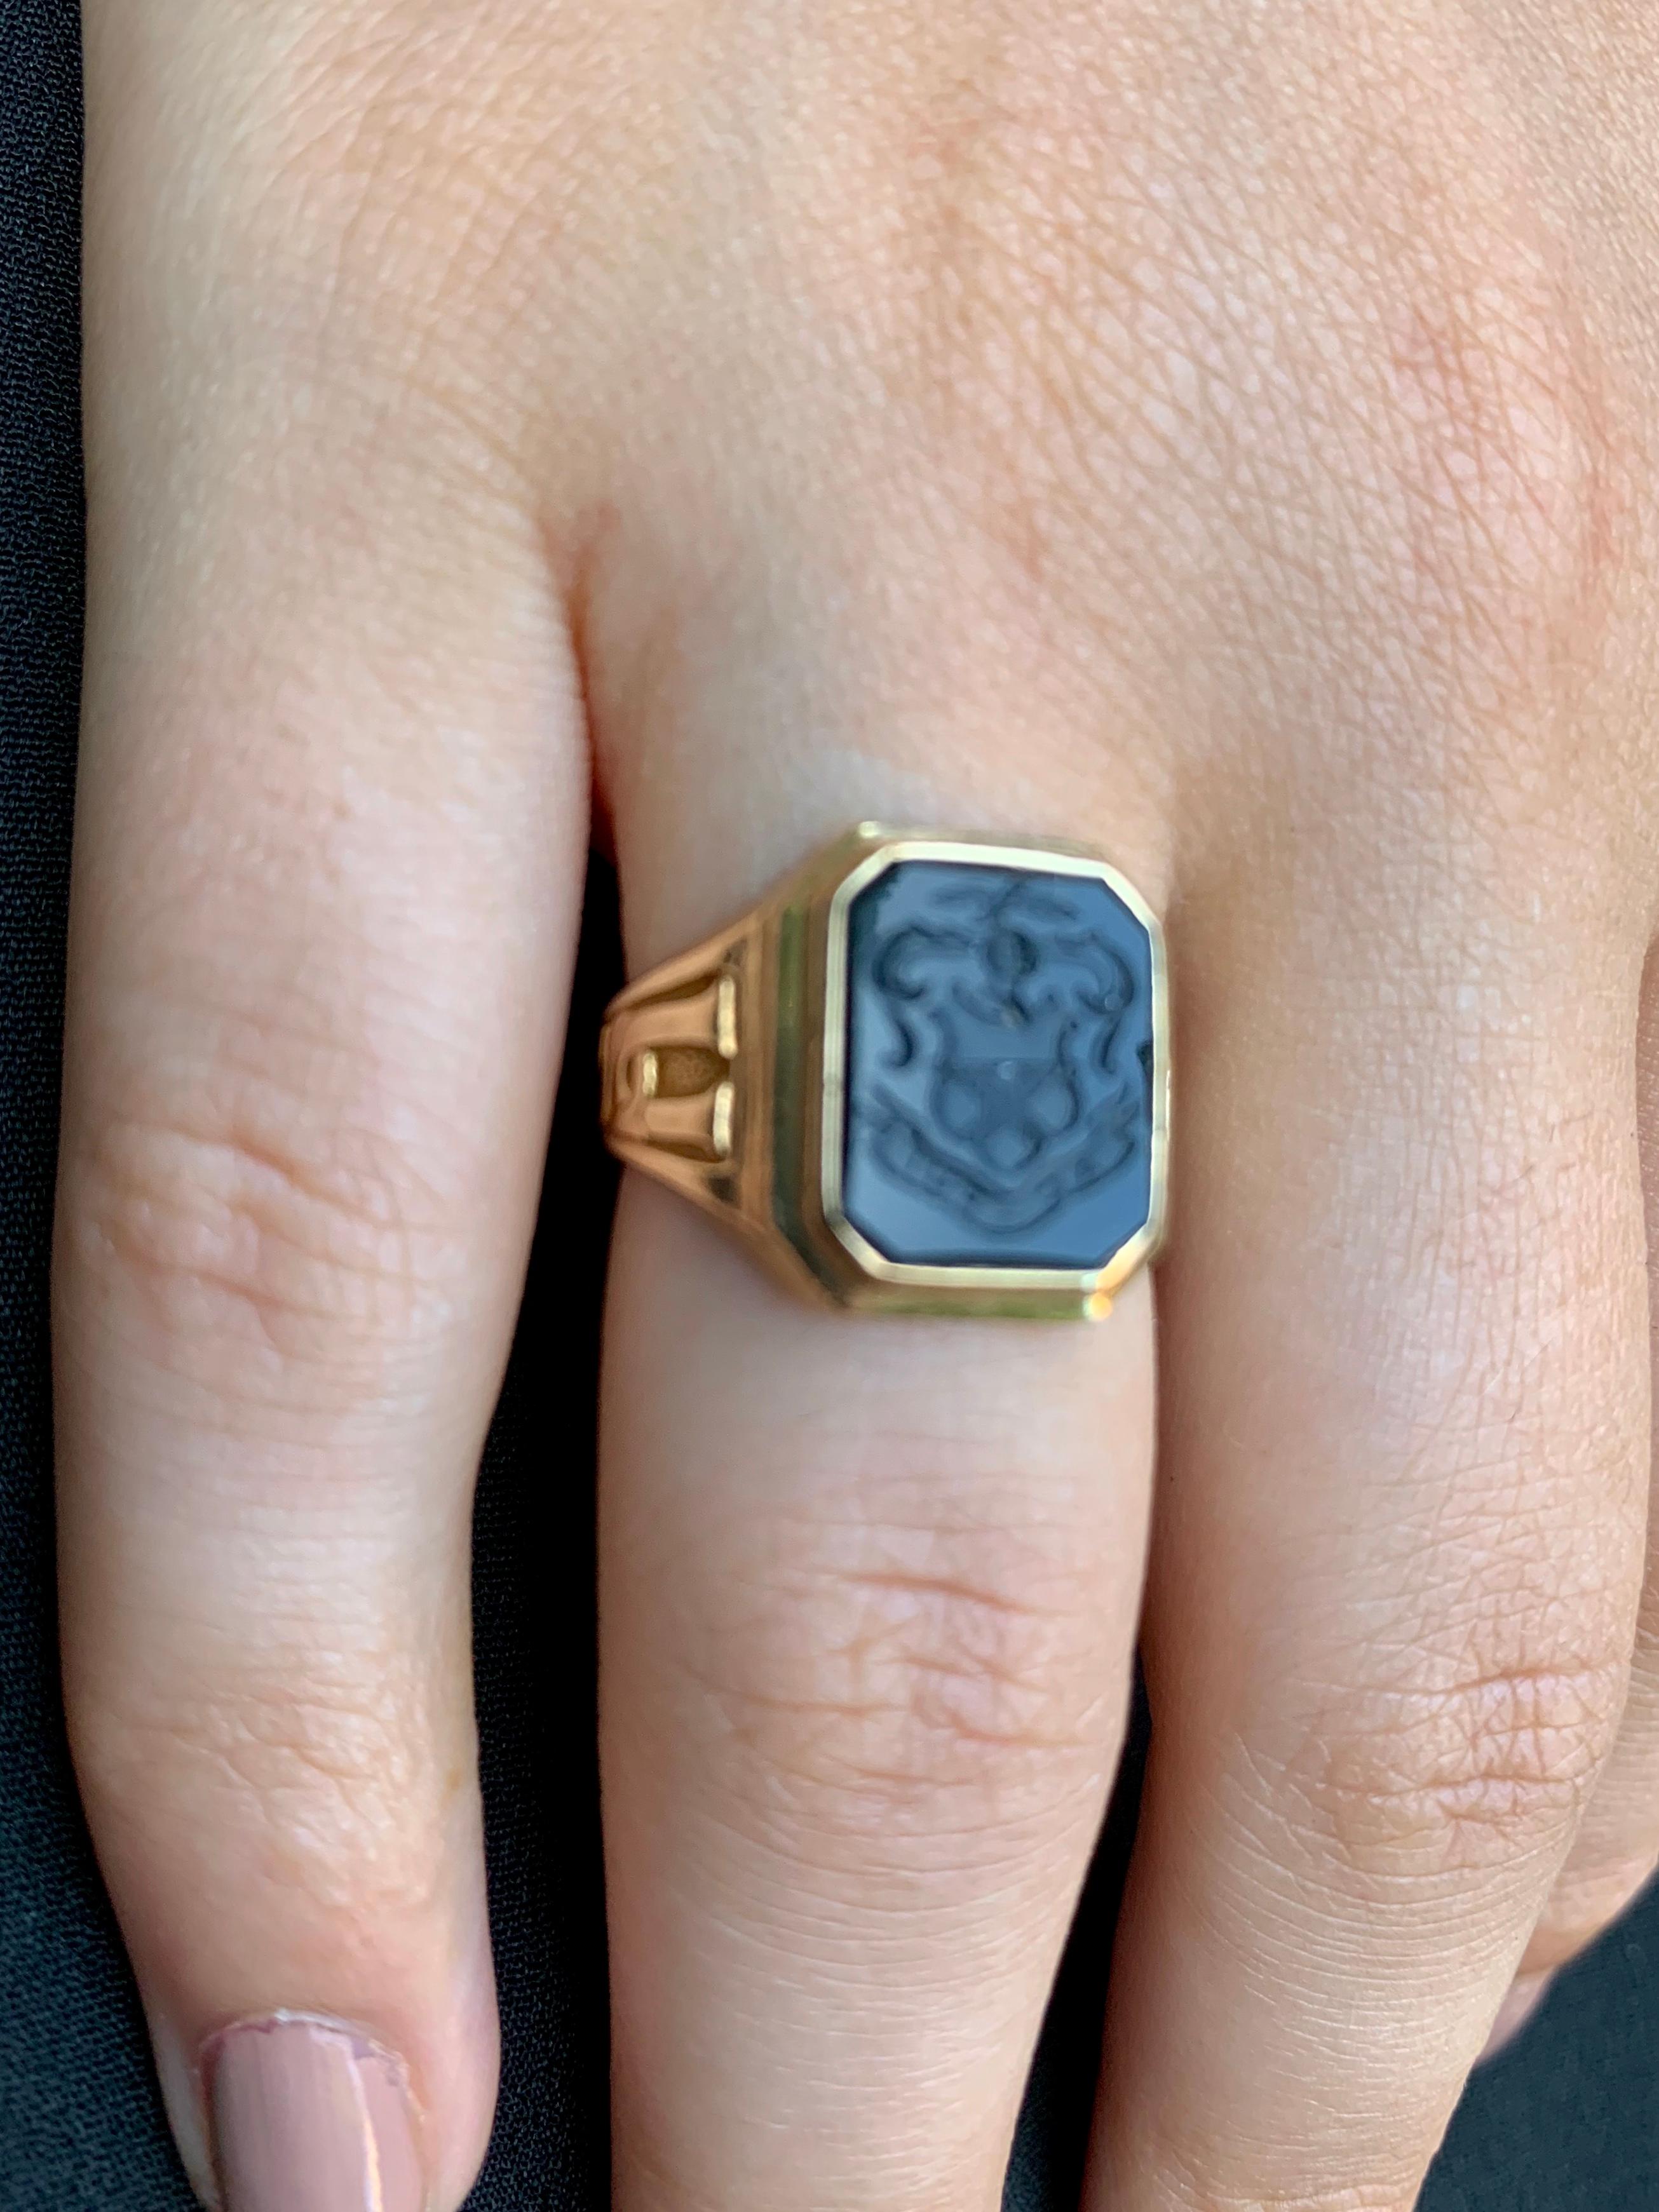 Fine Georgian style onyx intaglio ring engraved with an armorial heraldic device of a shield shaped crest topped with medieval style knight's helmet surrounded by scrolls and a central winged eagle, the base of intaglio with a banner and inscription